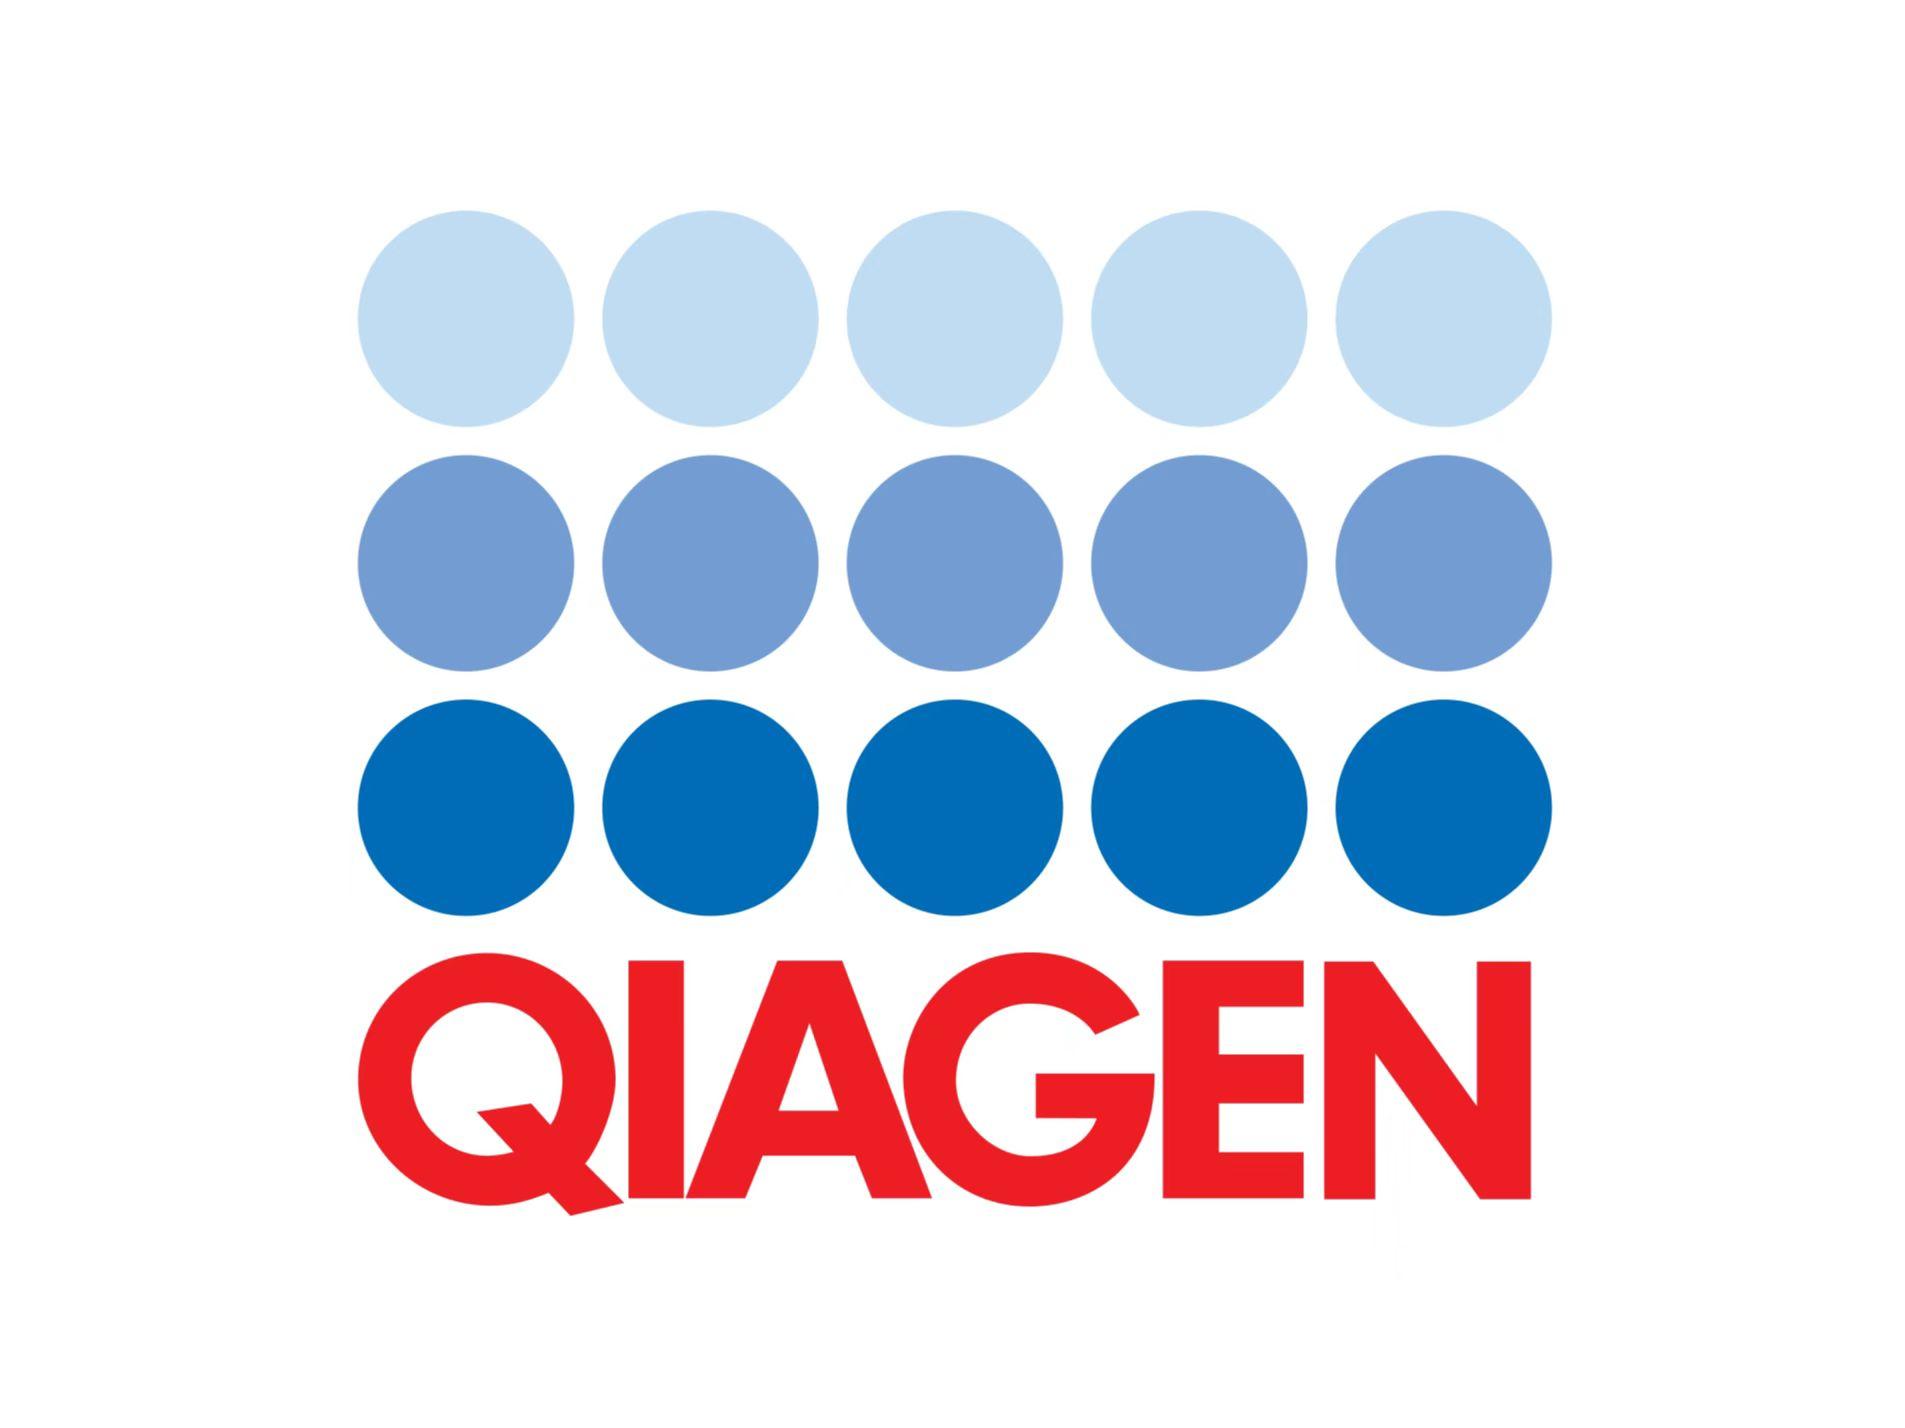 QIAGEN introduces QIAstat-Dx Analyzer 2.0 with remote test results access, enhancing collaboration across healthcare system